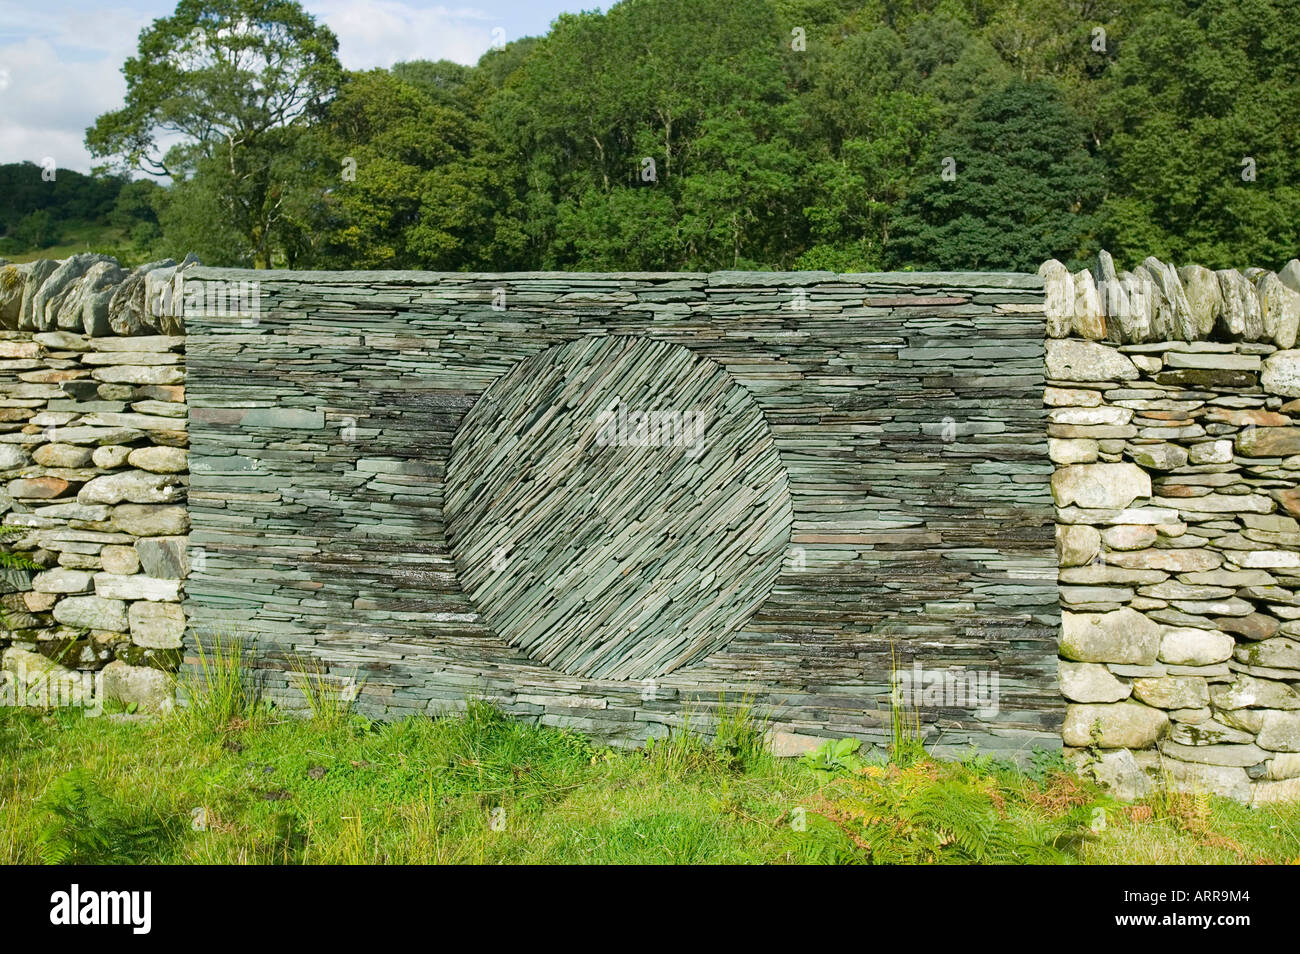 an Andy goldsworthy art project built into a sheep fold in Tilberthwaite, Coniston, Lake district, UK Stock Photo